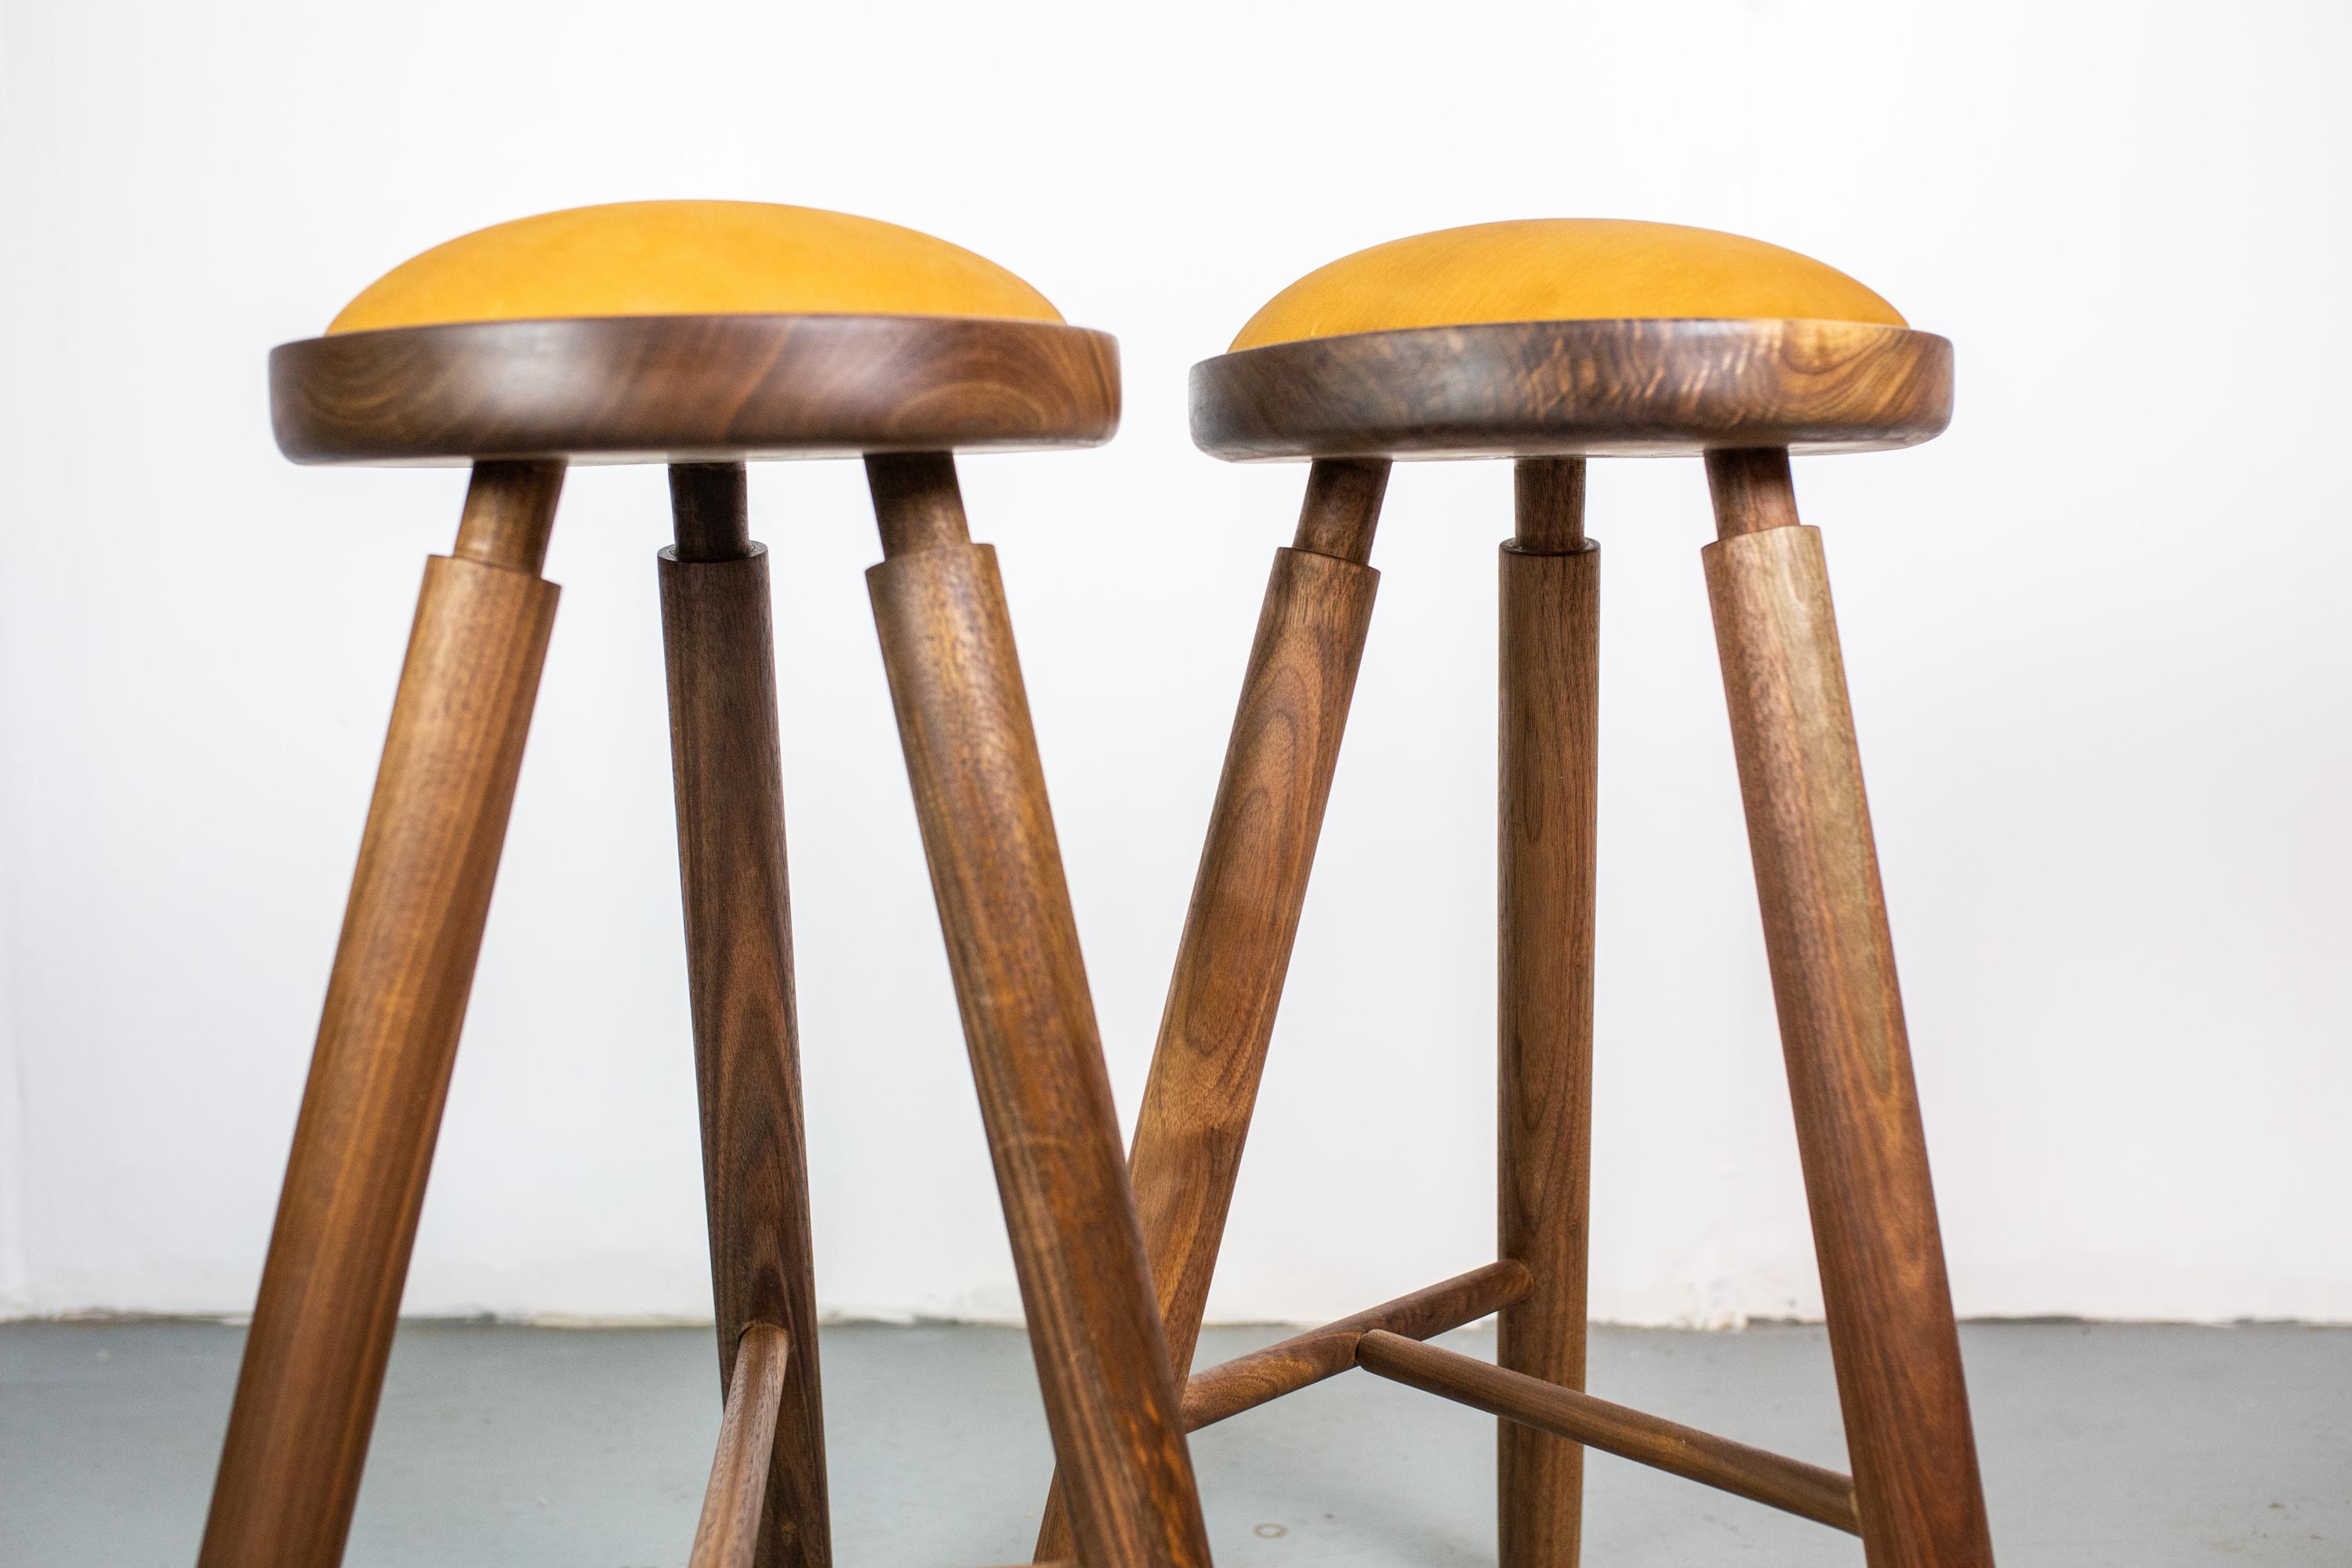 American Craftsman Pair of Michael Rozell Studio Bar Stools Figured Walnut and Leather USA, 2020 For Sale